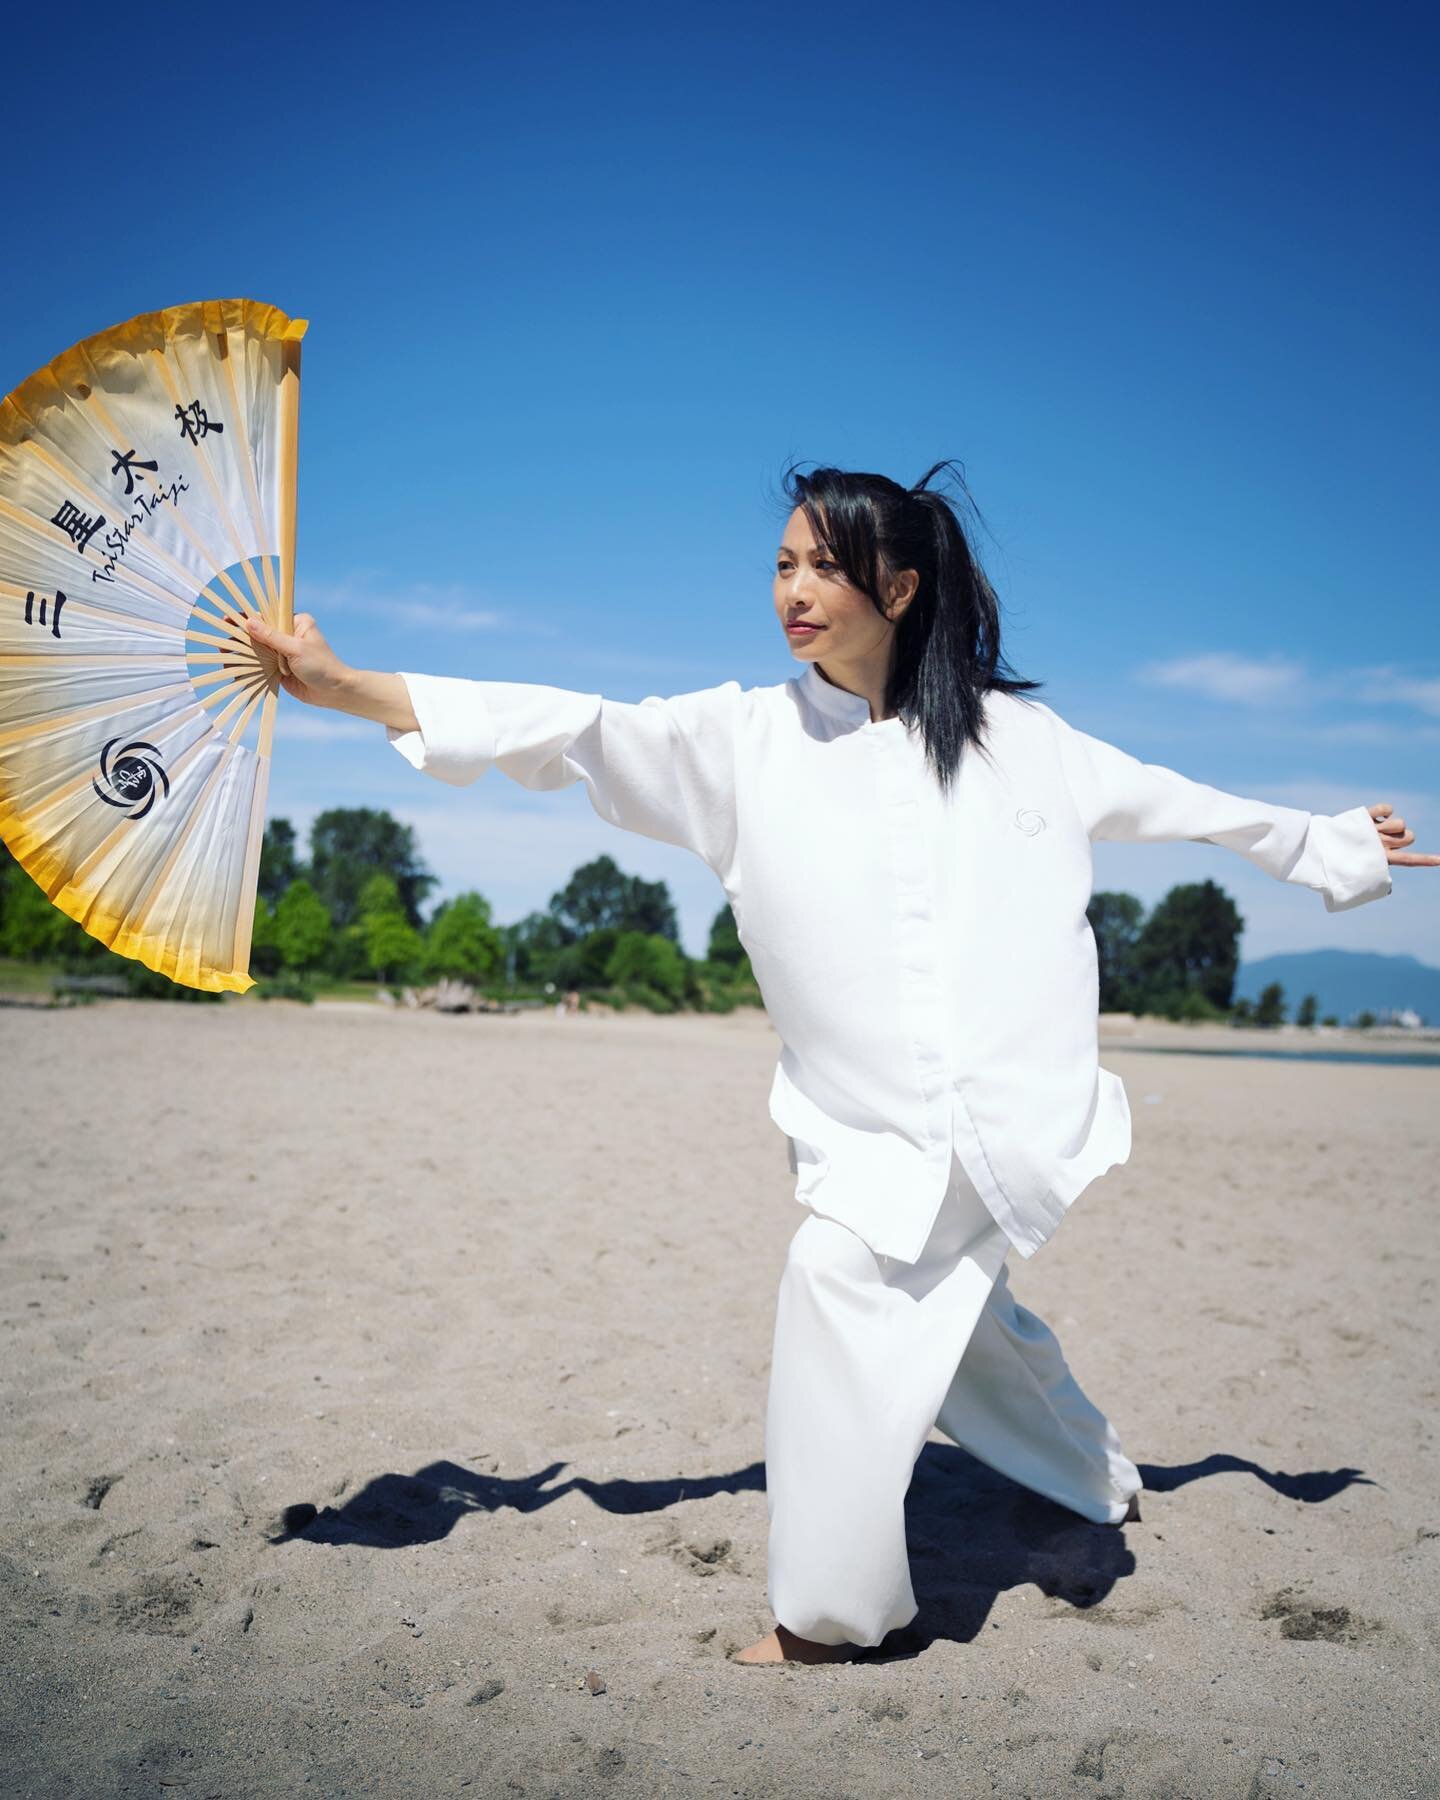 Summer is a wonderful time to practice!☀️ 

Training internal martial arts such as Tai Chi &amp; Qigong unblocks and unleashes the flow of qi (energy) within, invoking a natural sense of peace, healing, balance and harmony within ourselves, and conse